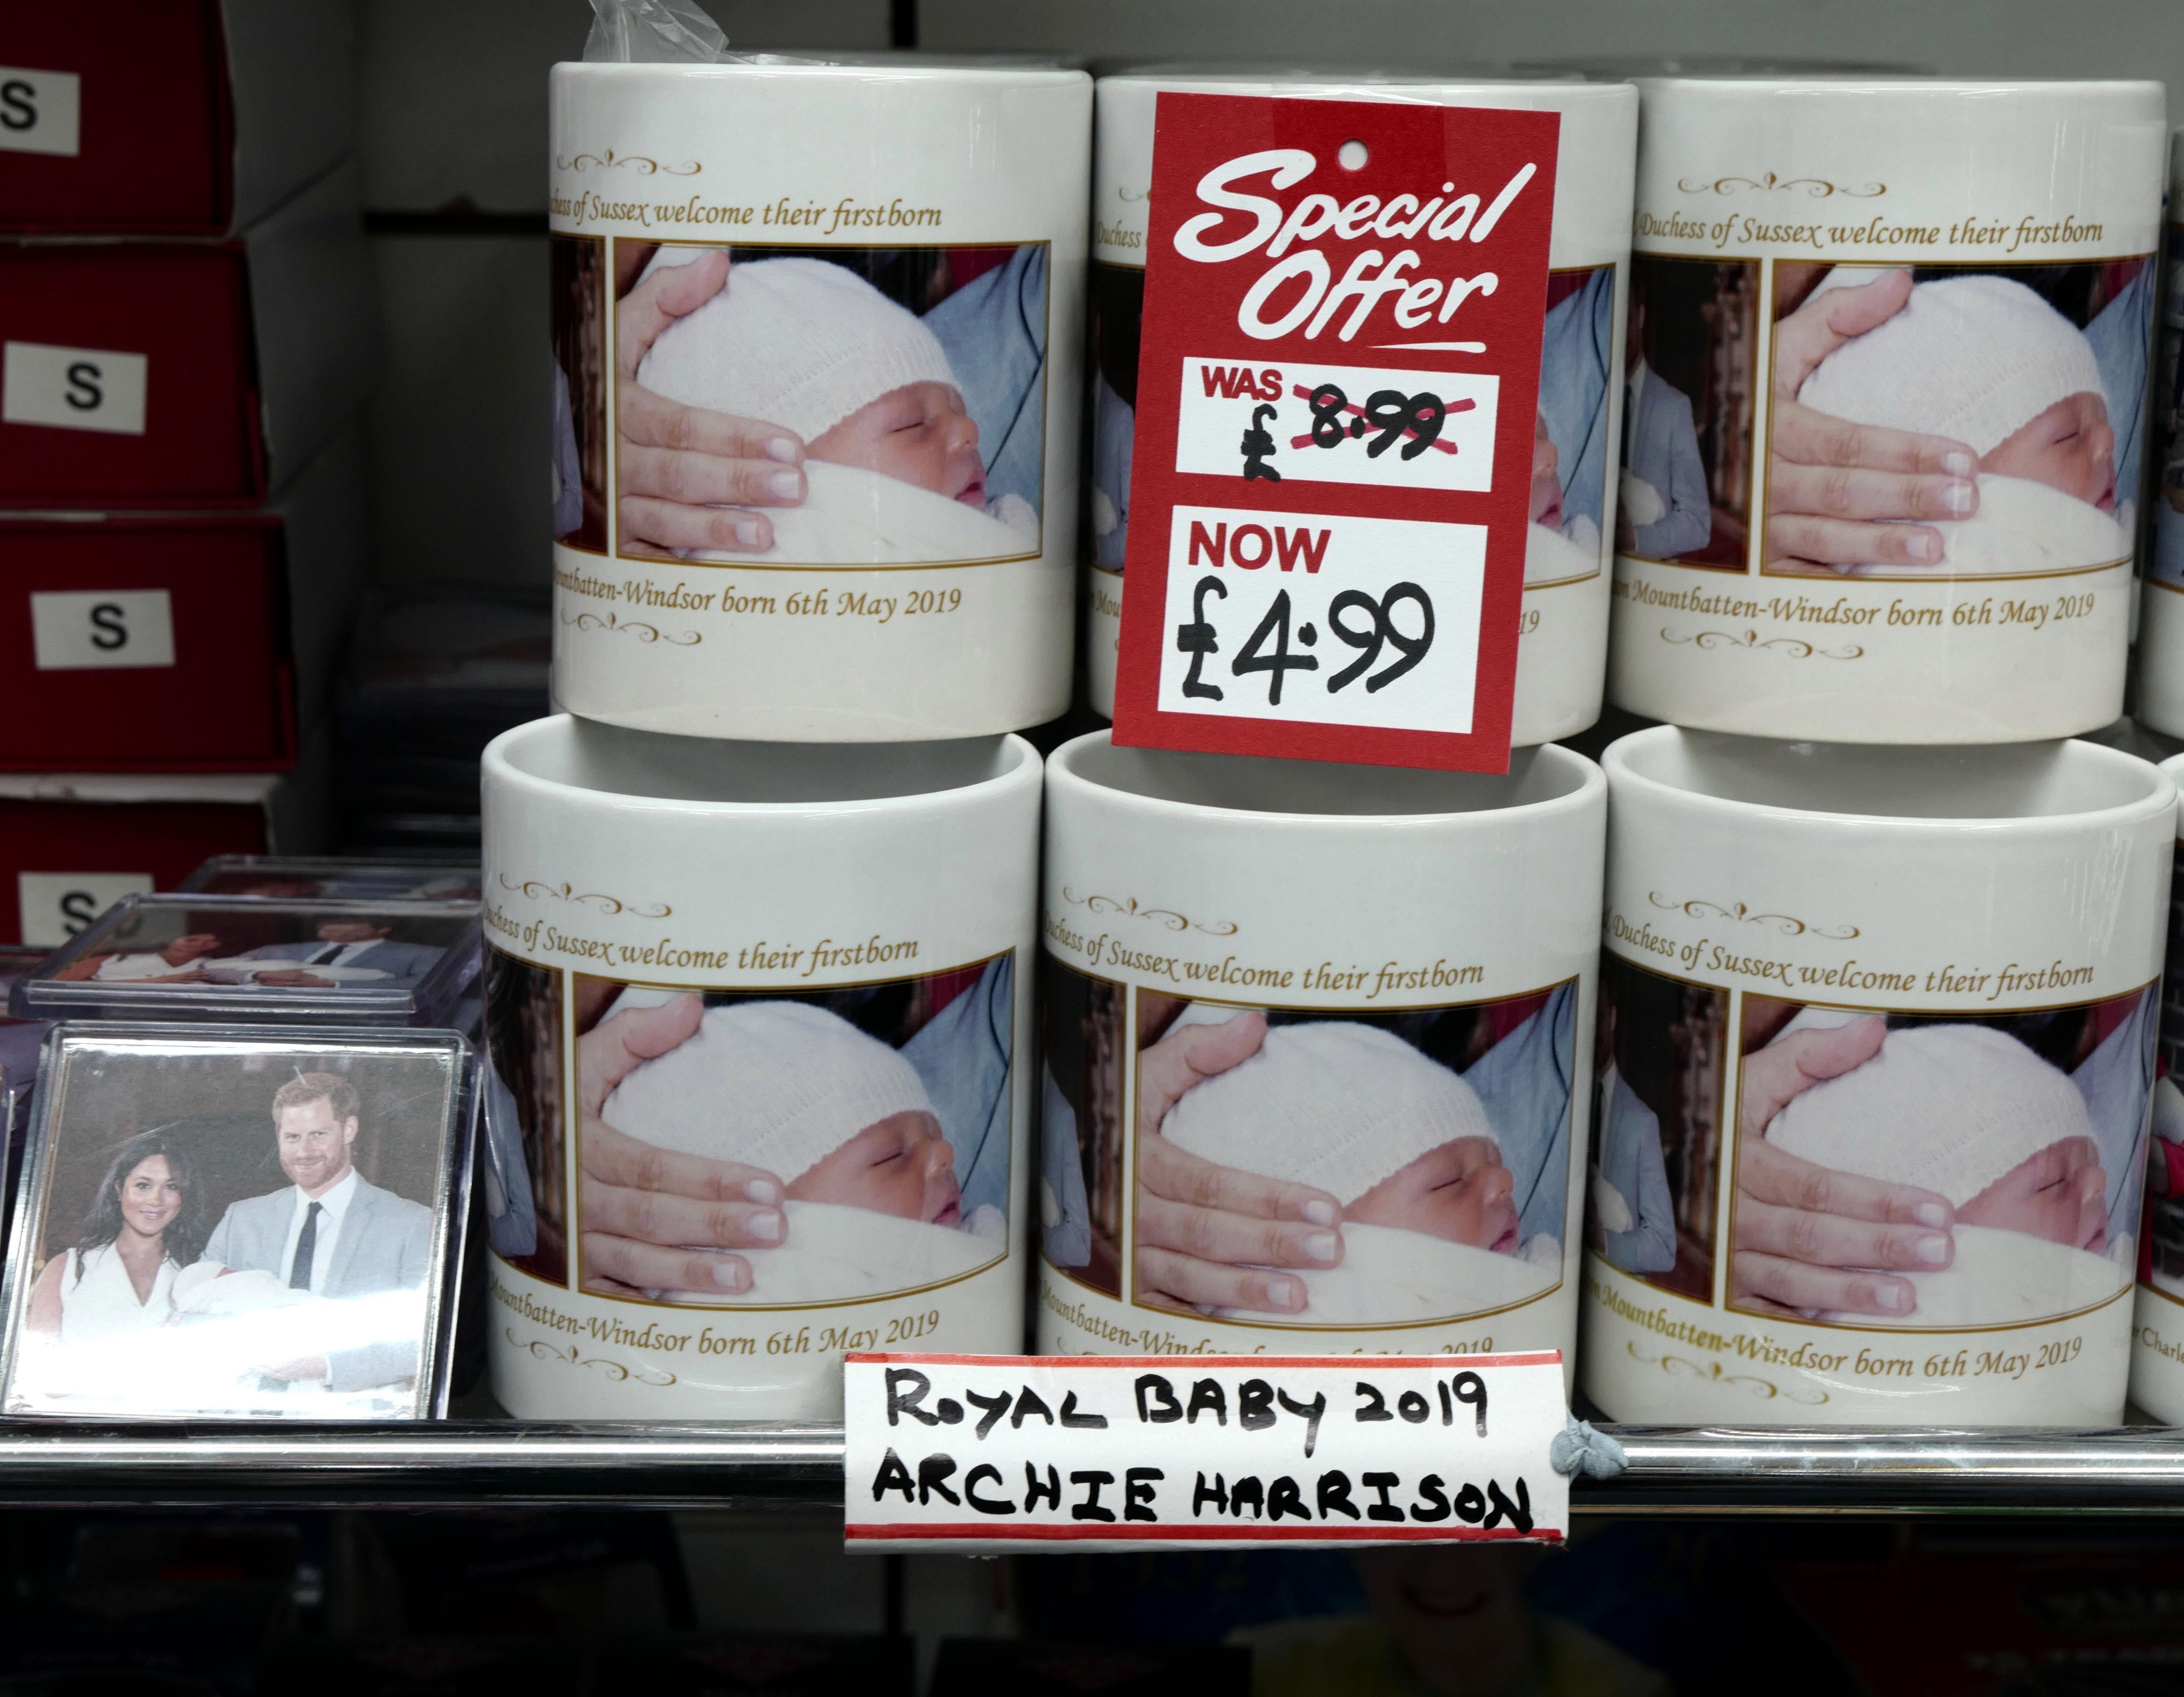  An insider said: 'If these price cuts are anything to go by then perhaps the Sussexes have misjudged how popular items with their names on will be'